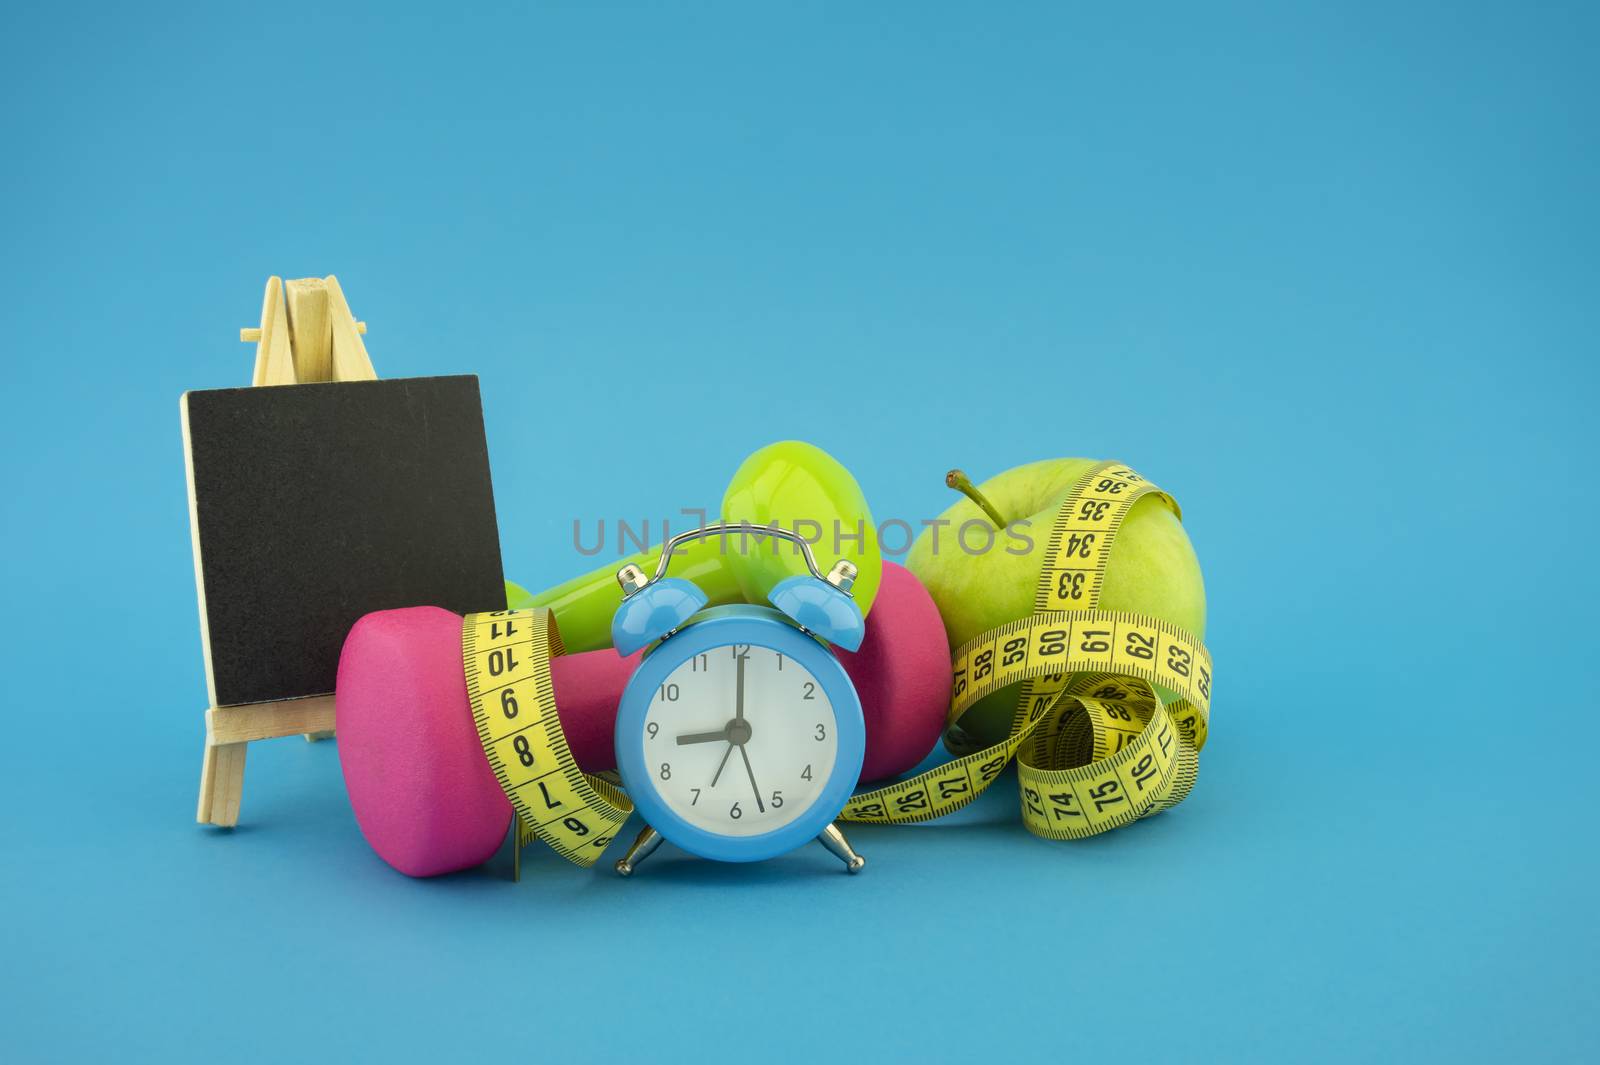 Starting healthy lifestyle concept. Still life with pink and green dumbbells, measuring tape, apple, chalkboard and alarm clock on green background